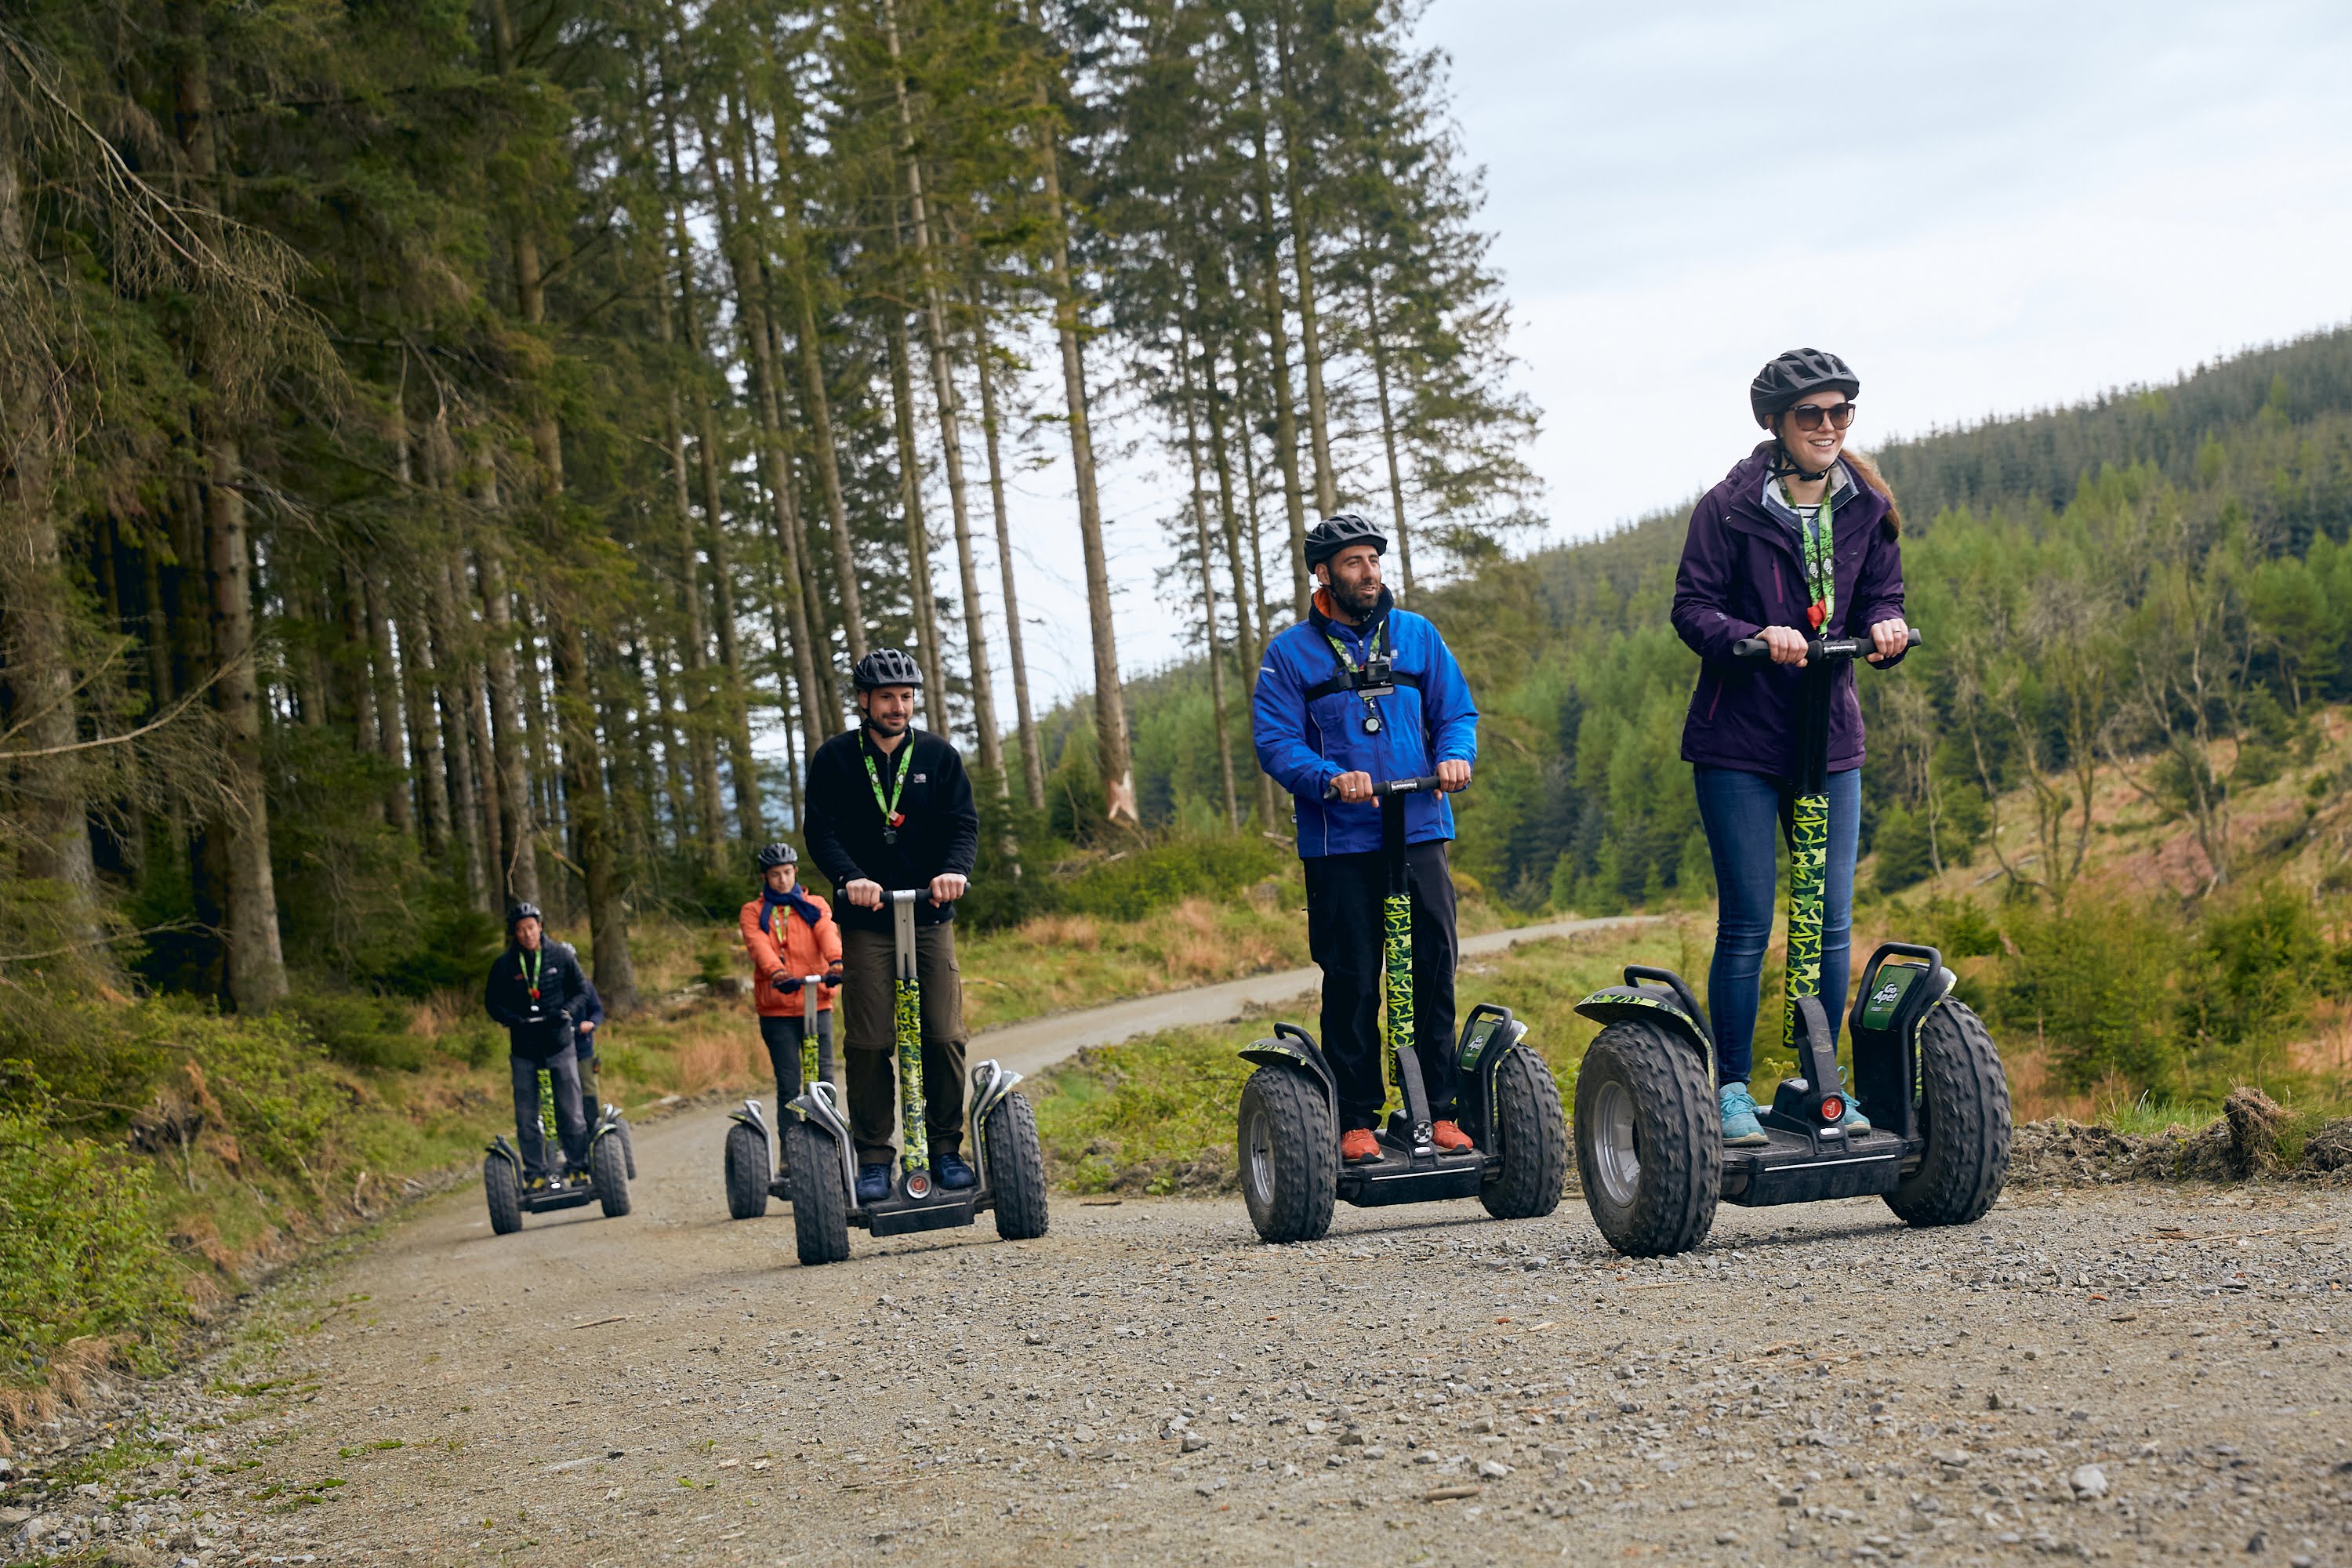 Forest Segway Near Me: Explore The Forest